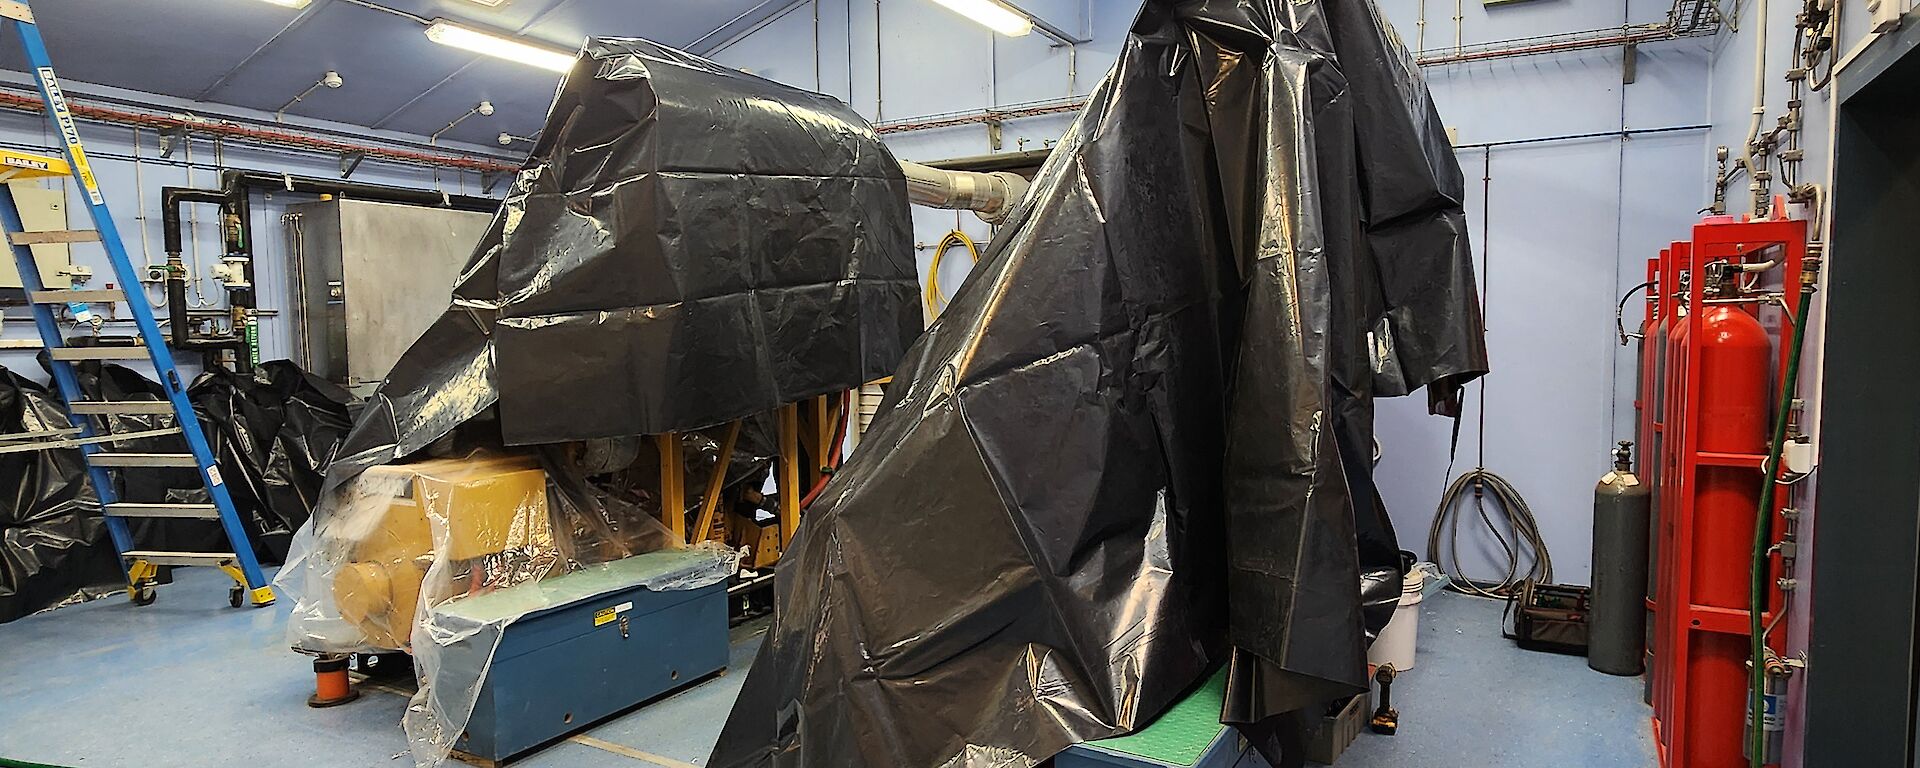 Two large machines in a blue room with black bags covering them in preparation for work